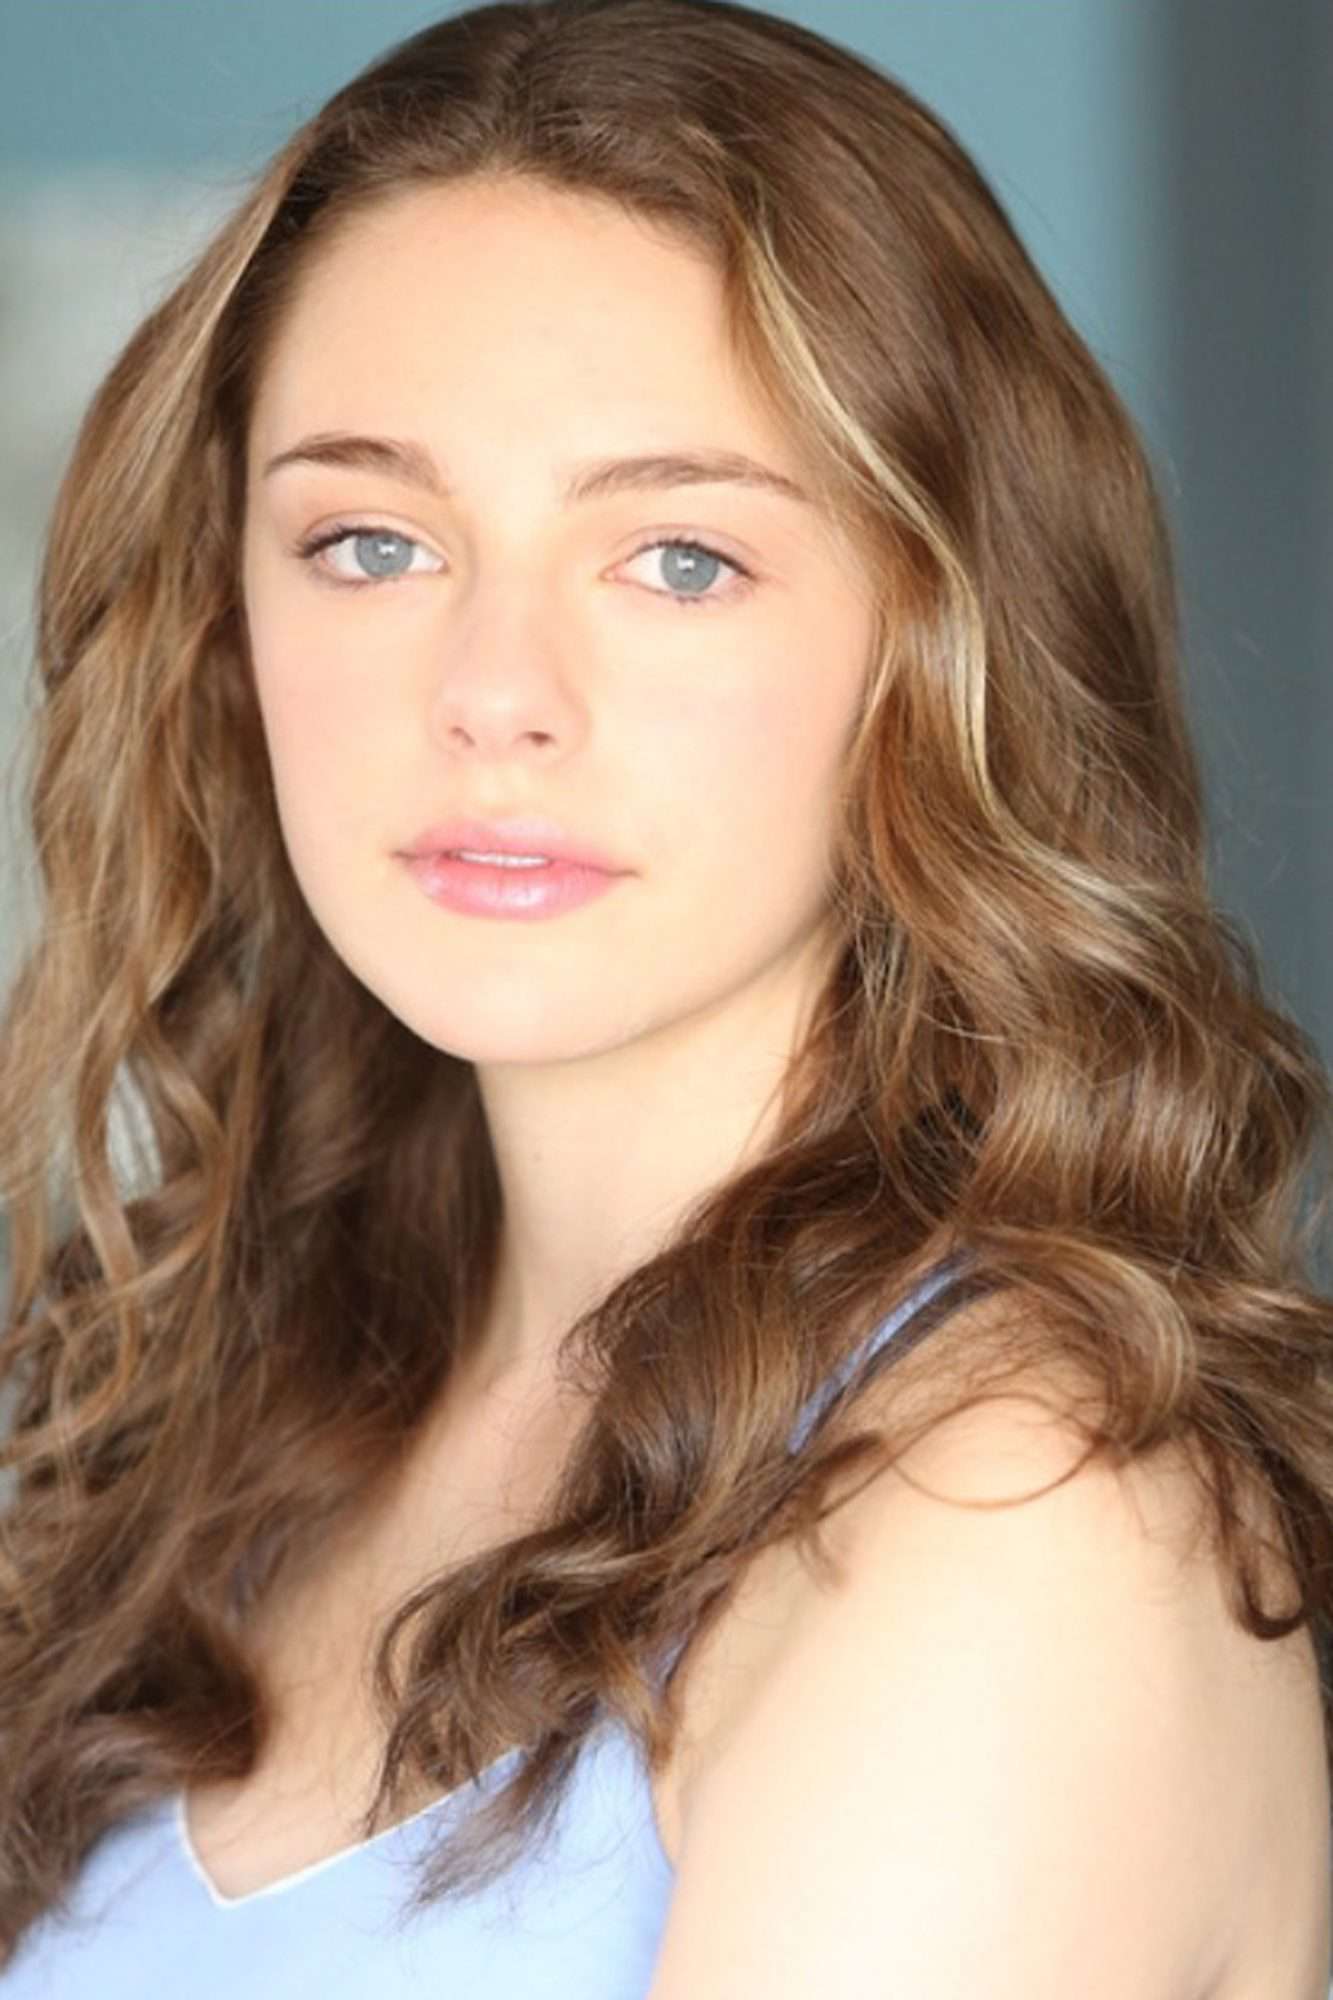 danielle rose russell movies and tv shows